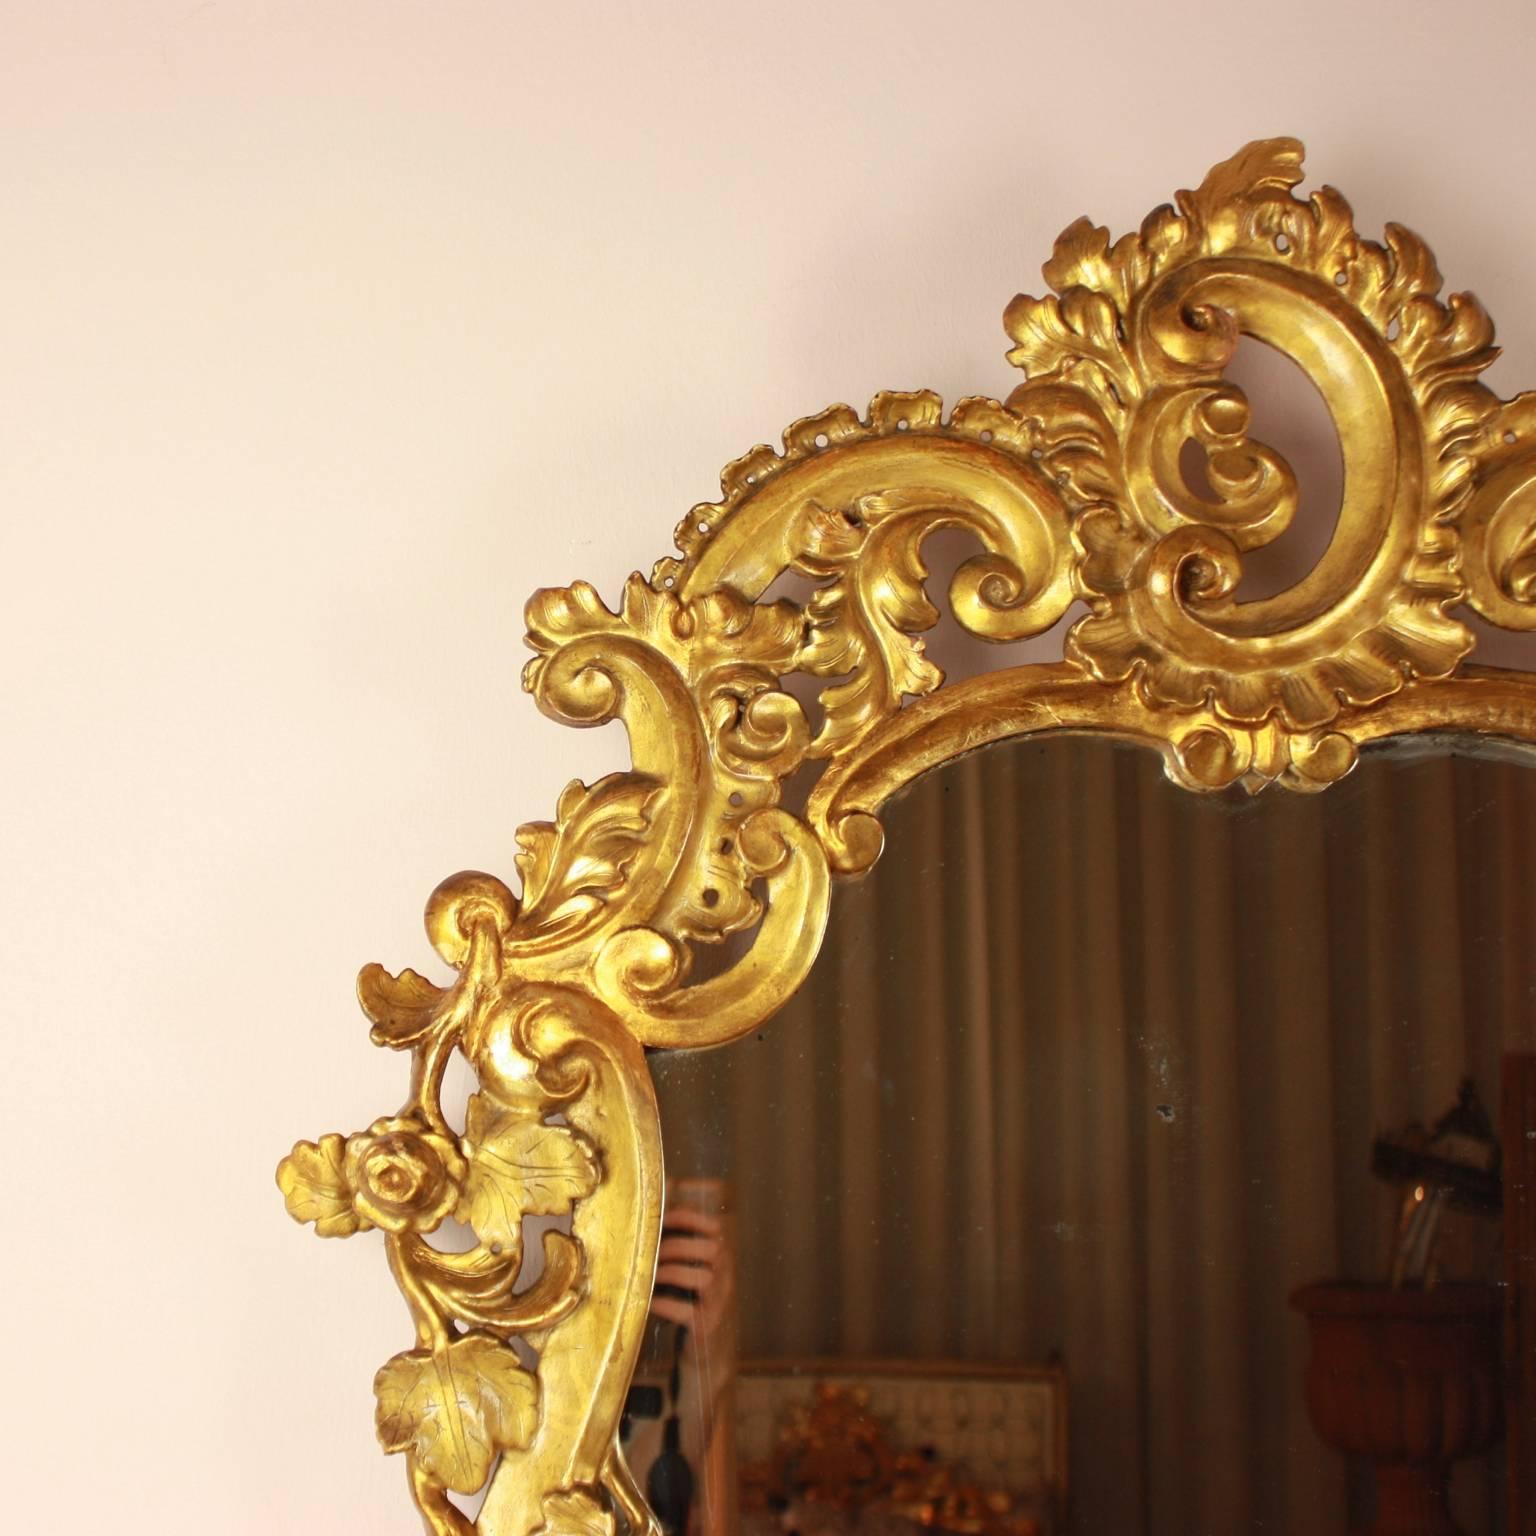 An early 18th century giltwood mirror, with a shaped plate contained within a cartouche shaped frame, carved with a rich array of scrolling patterns, acanthus leaves and detailed floral carvings. The cresting pierced displaying a C-shaped surmount